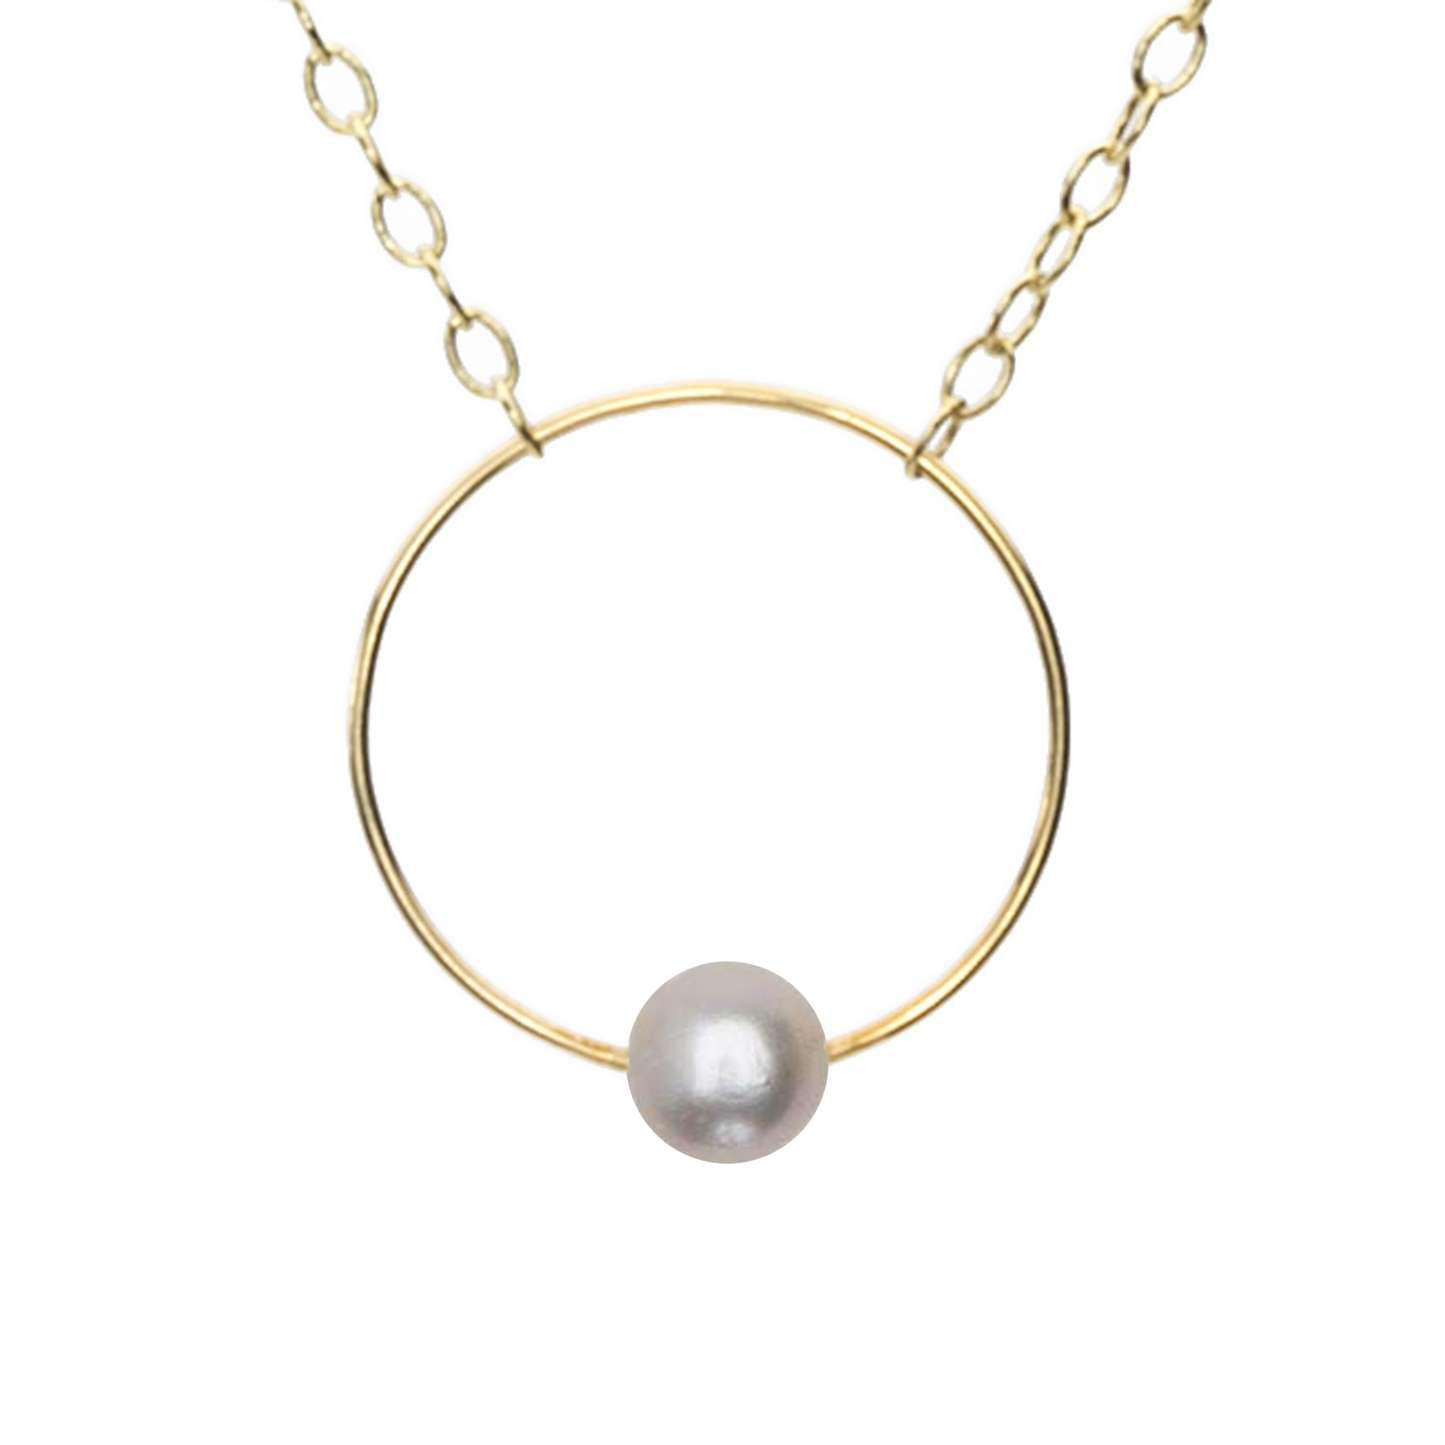 Petite Circle Pendant Necklace with Round Freshwater Pearl